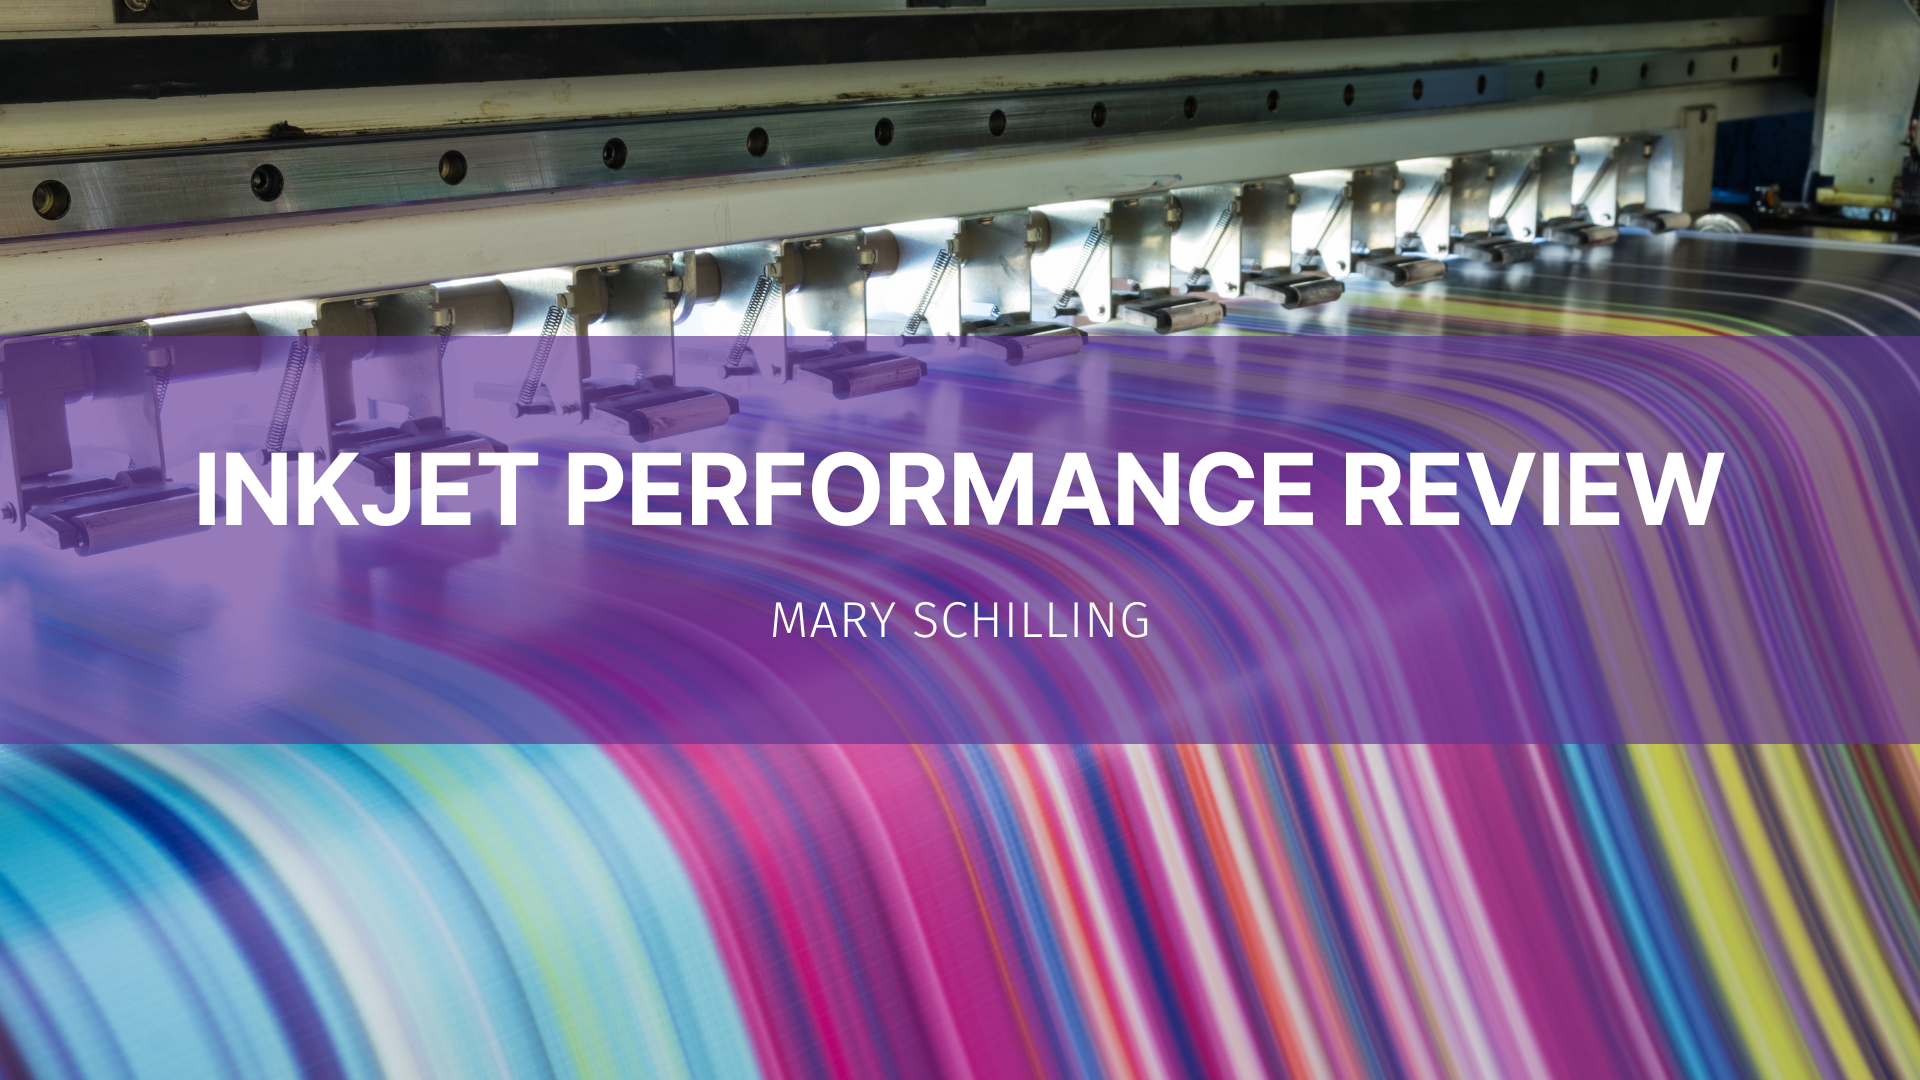 Featured image for “Inkjet Performance Review”